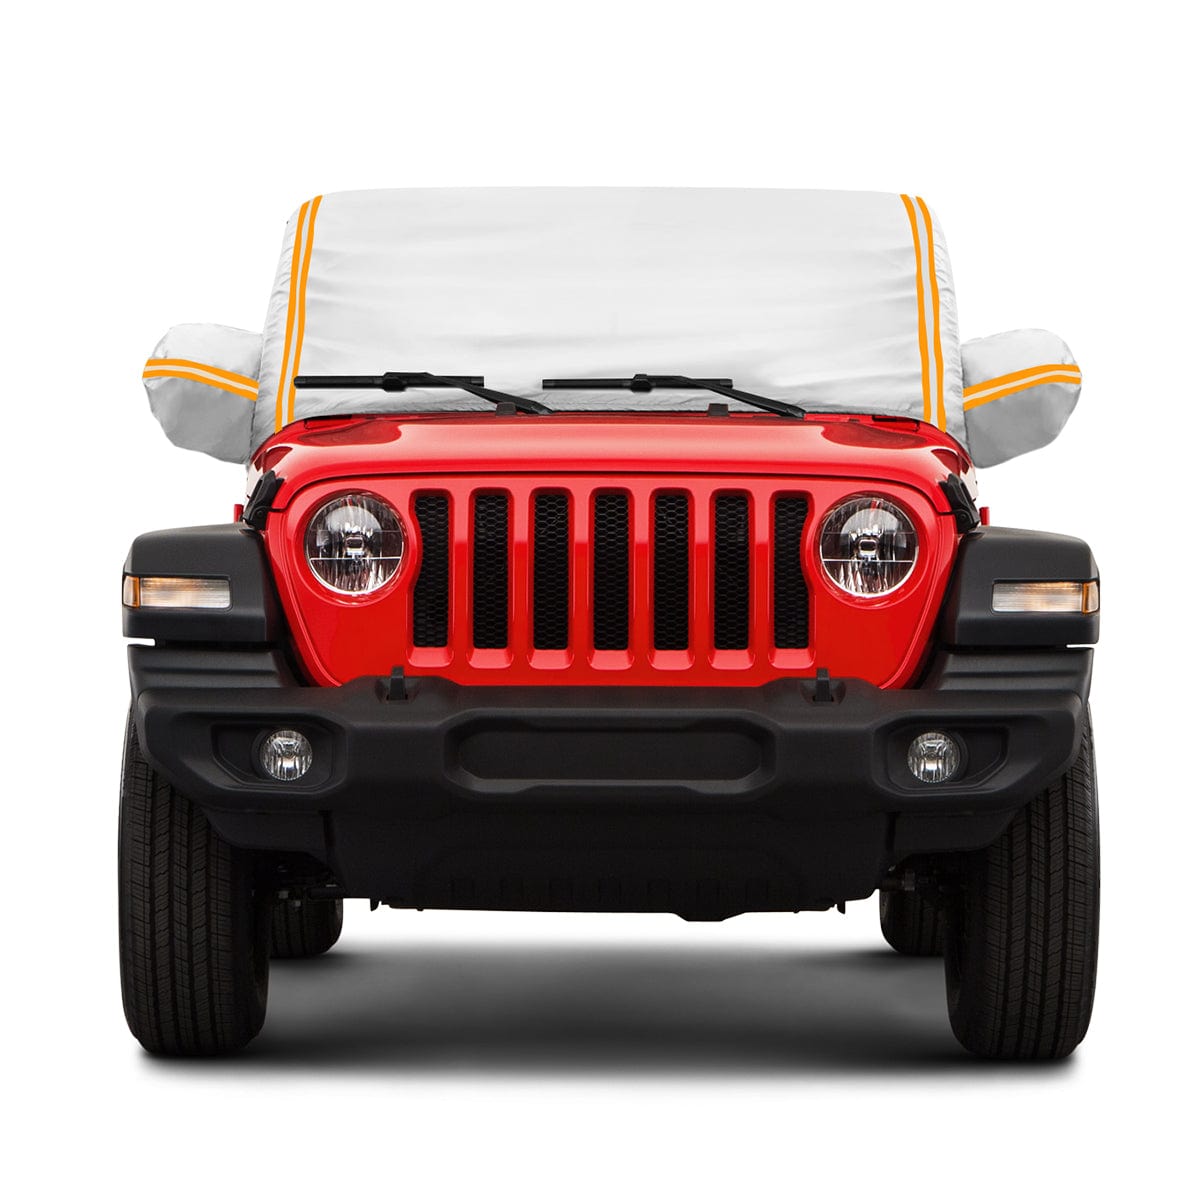 SUPAREE Jeep Cover Suparee Jeep Cab Cover Waterproof for 2007-Later Wrangler JK JL 4 Door Product description